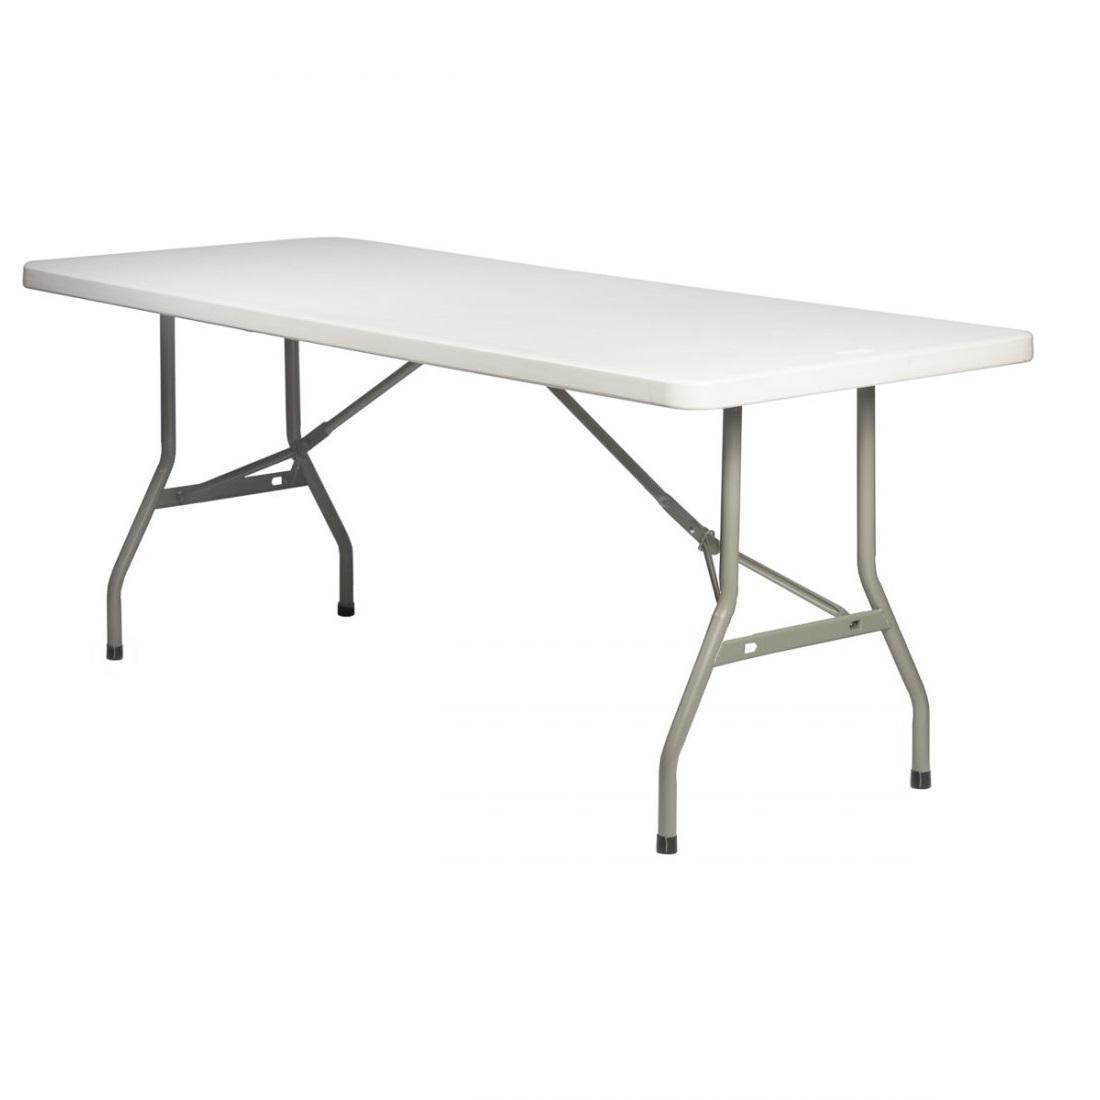 6' Rectangle Table, Table and Tent Rentals